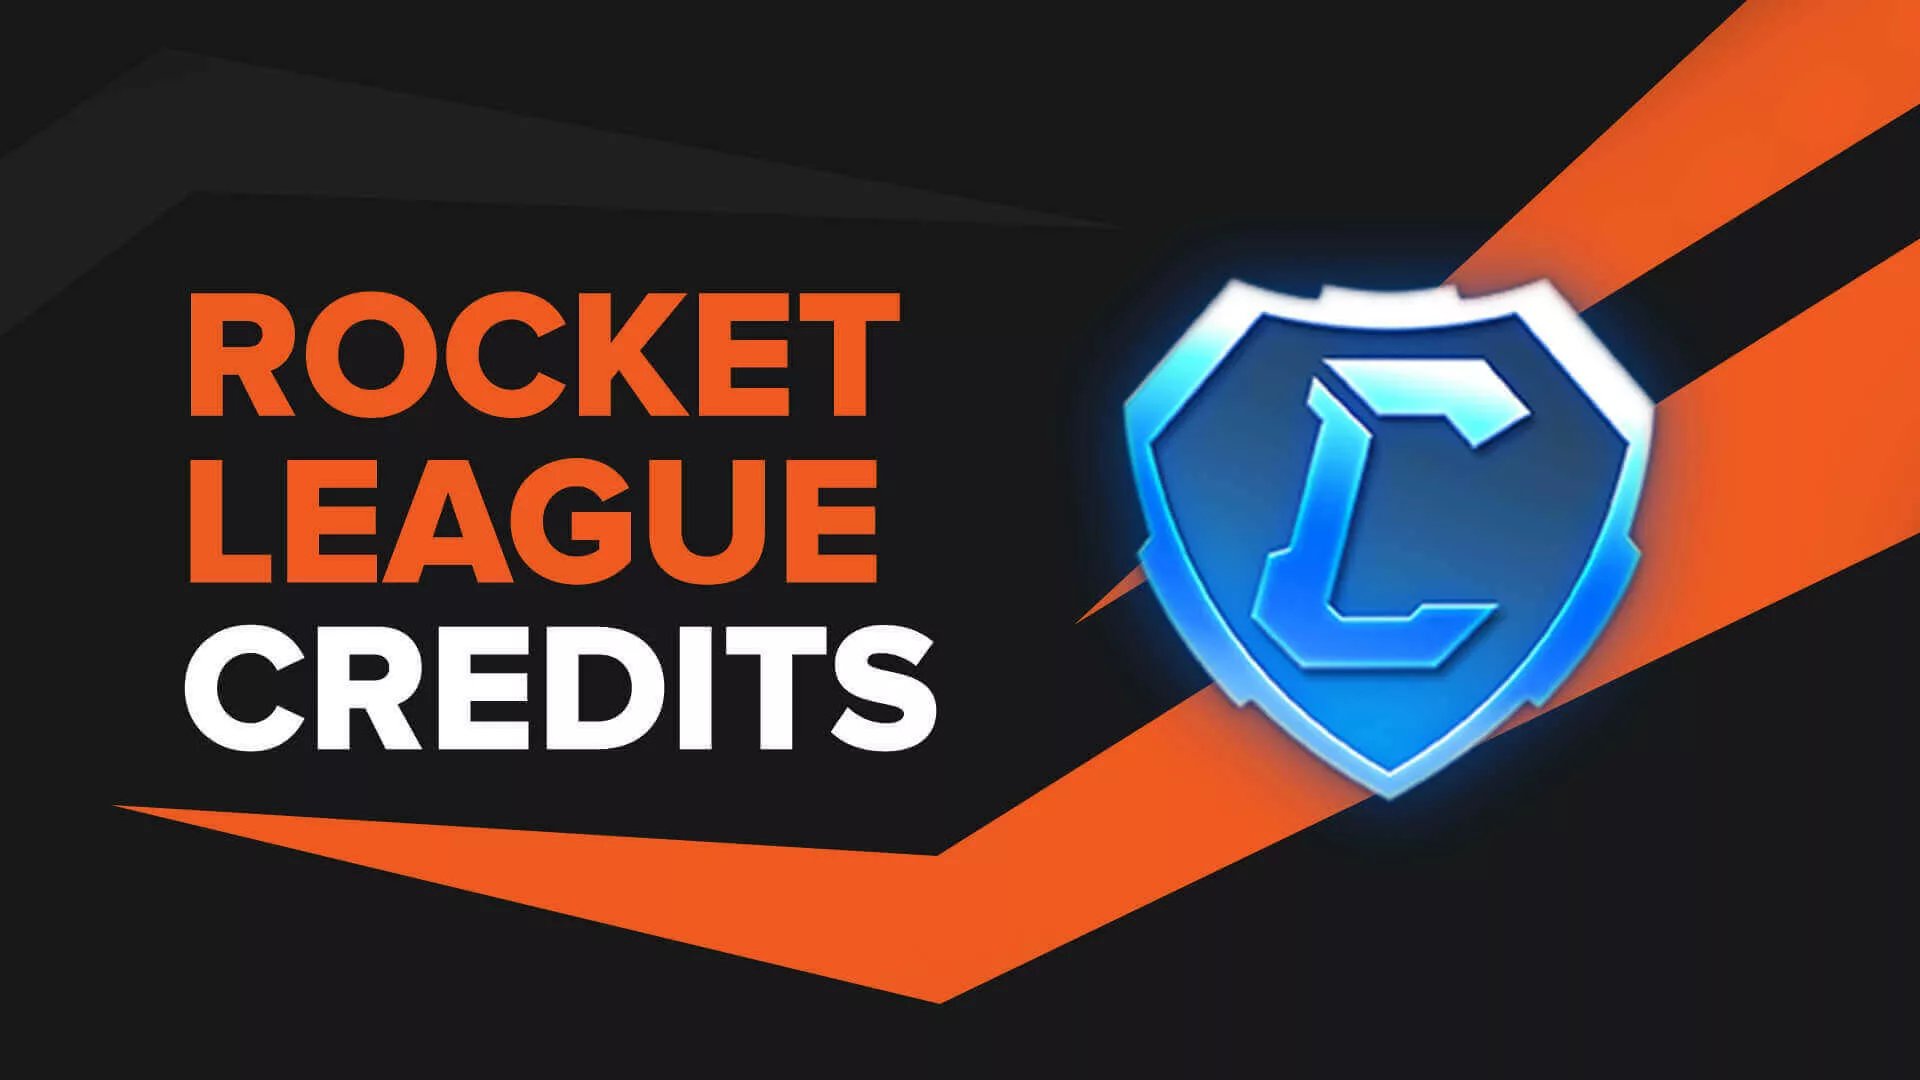 The Rocket League Credit System explained and how to get Credits for free